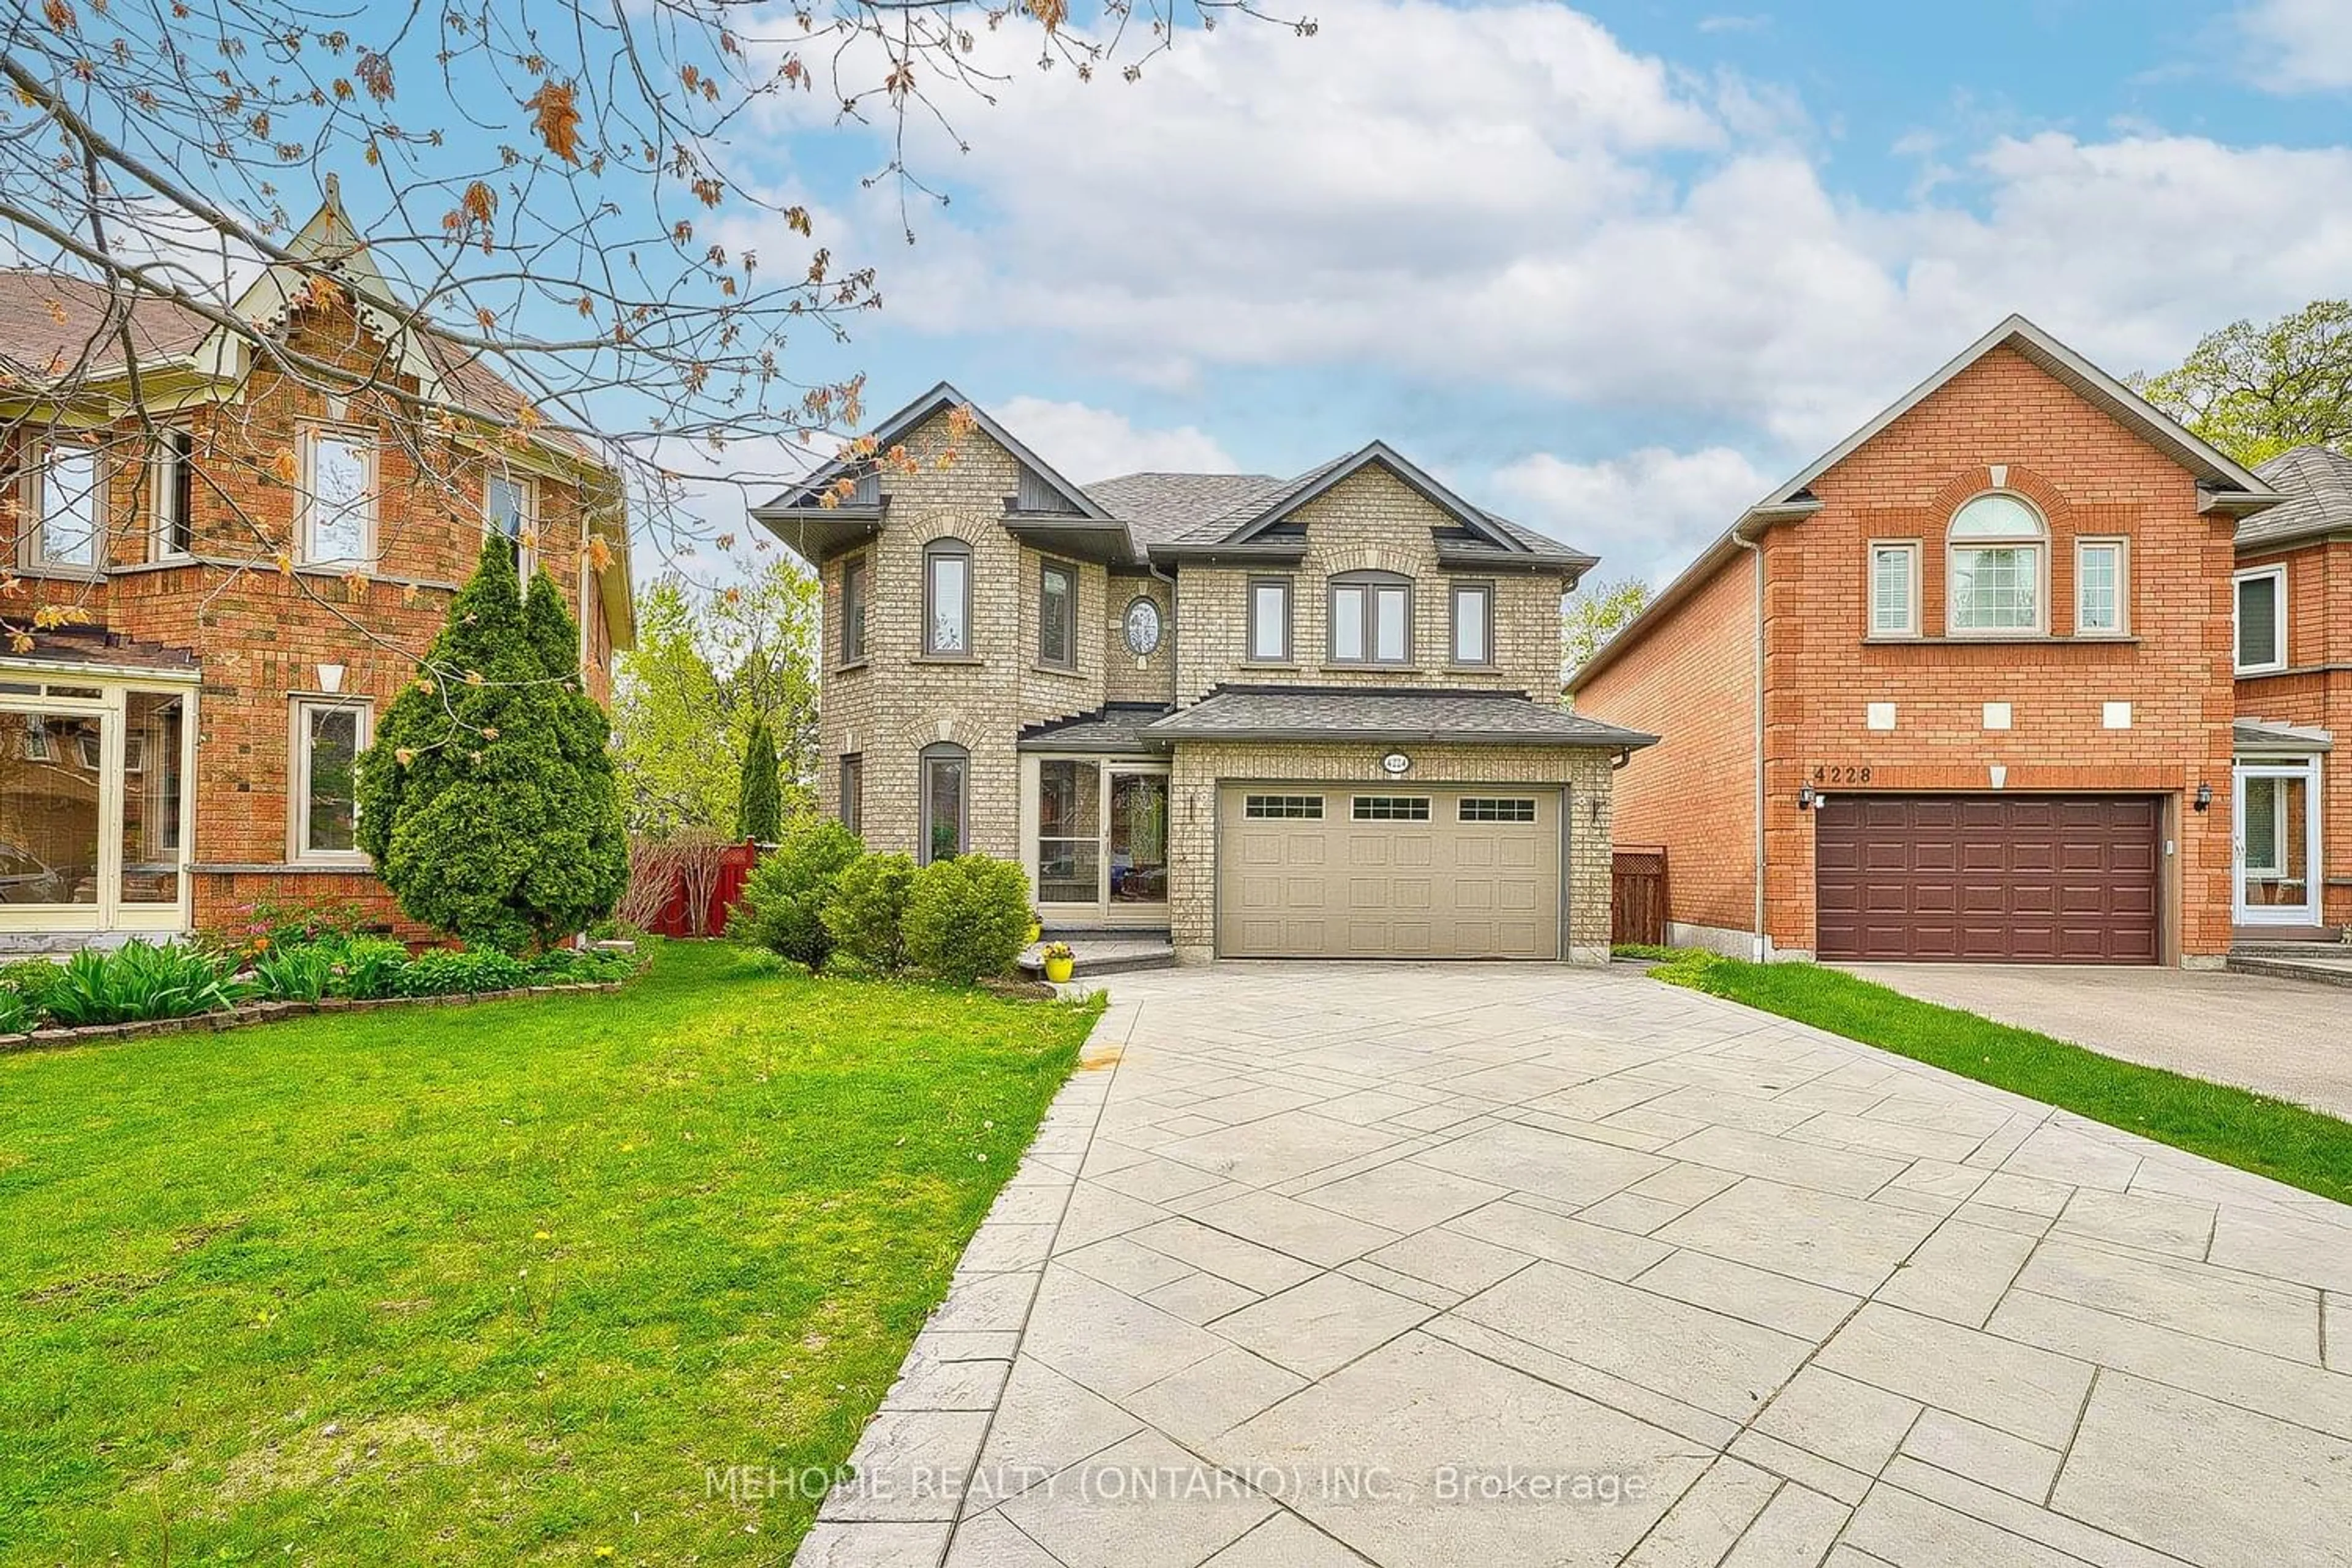 Home with brick exterior material for 4224 Sagebrush Tr, Mississauga Ontario L5C 4S2